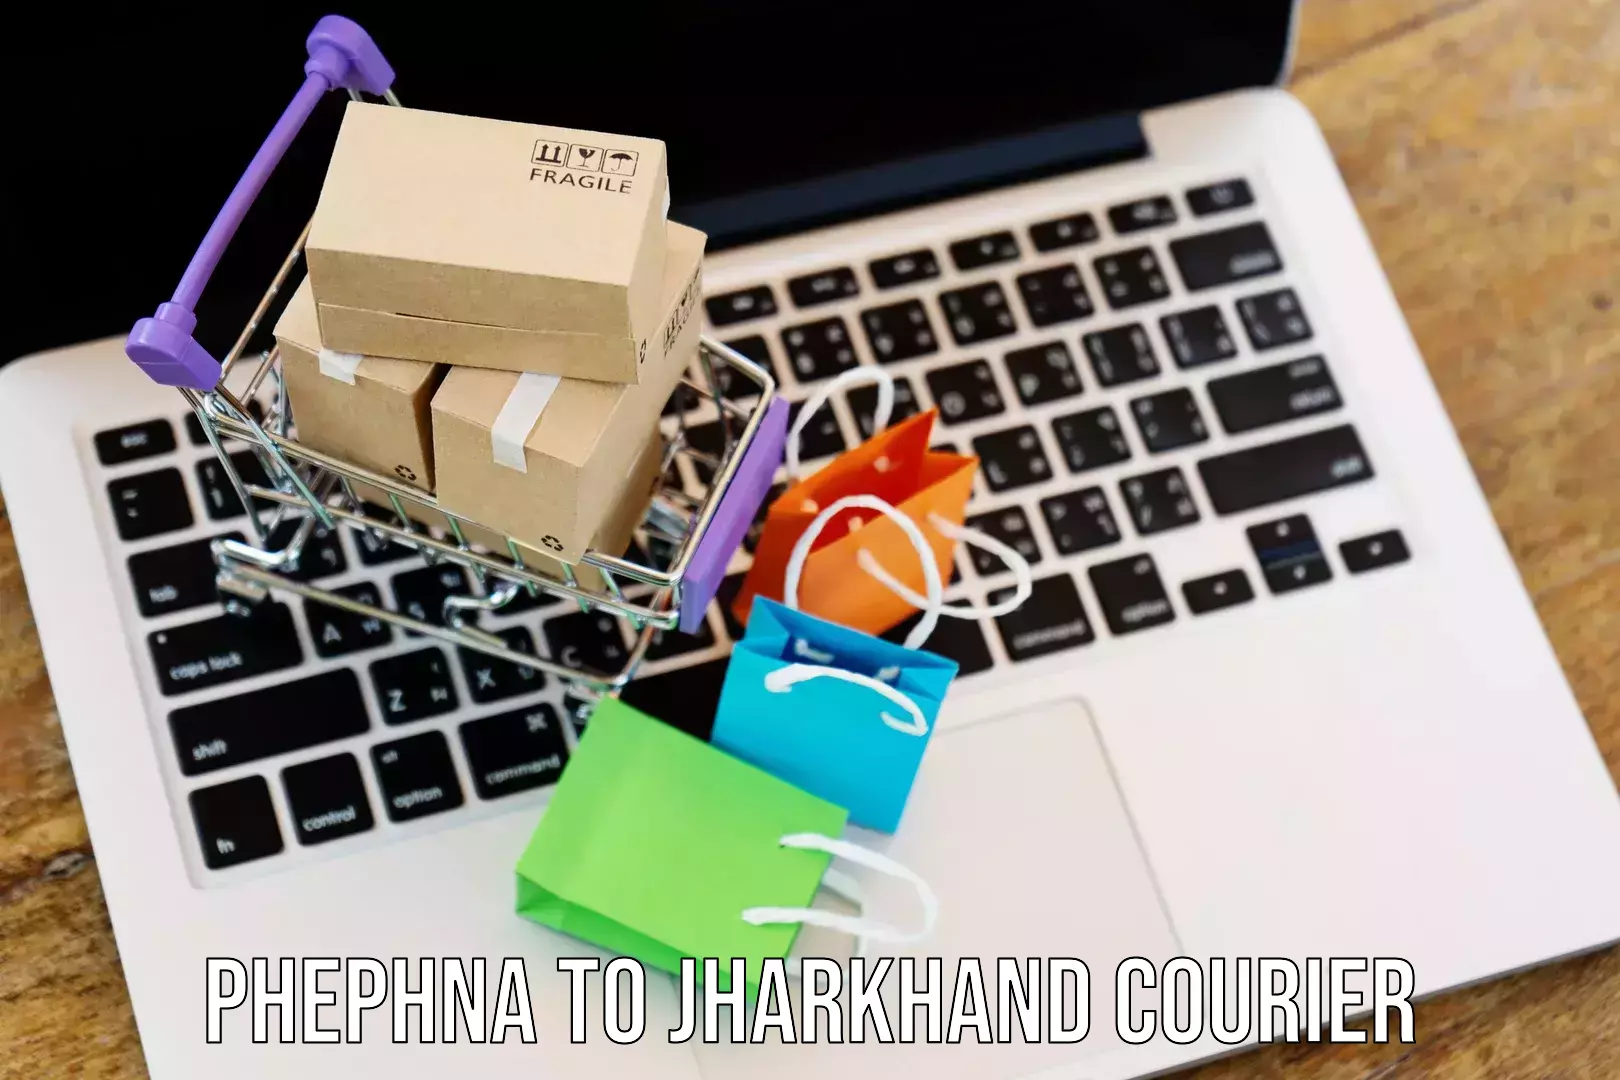 Reliable courier services in Phephna to Jharkhand